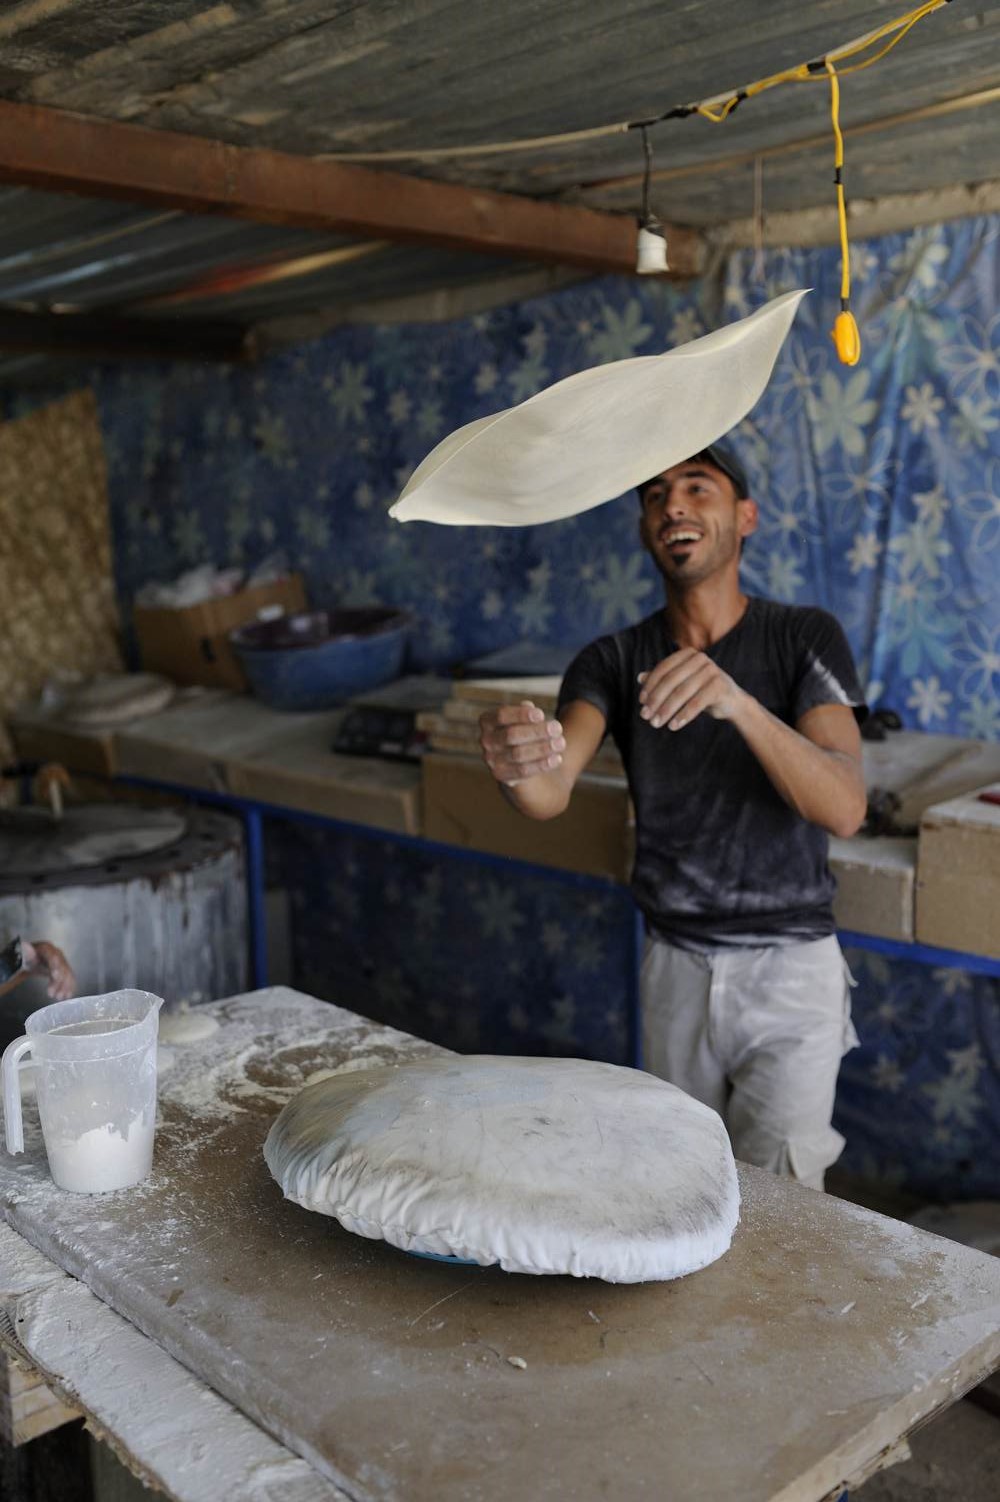  Bread is distributed daily by the UNHCR in Za'atari camp; yet the Syrians prefer their own fresh bread. 